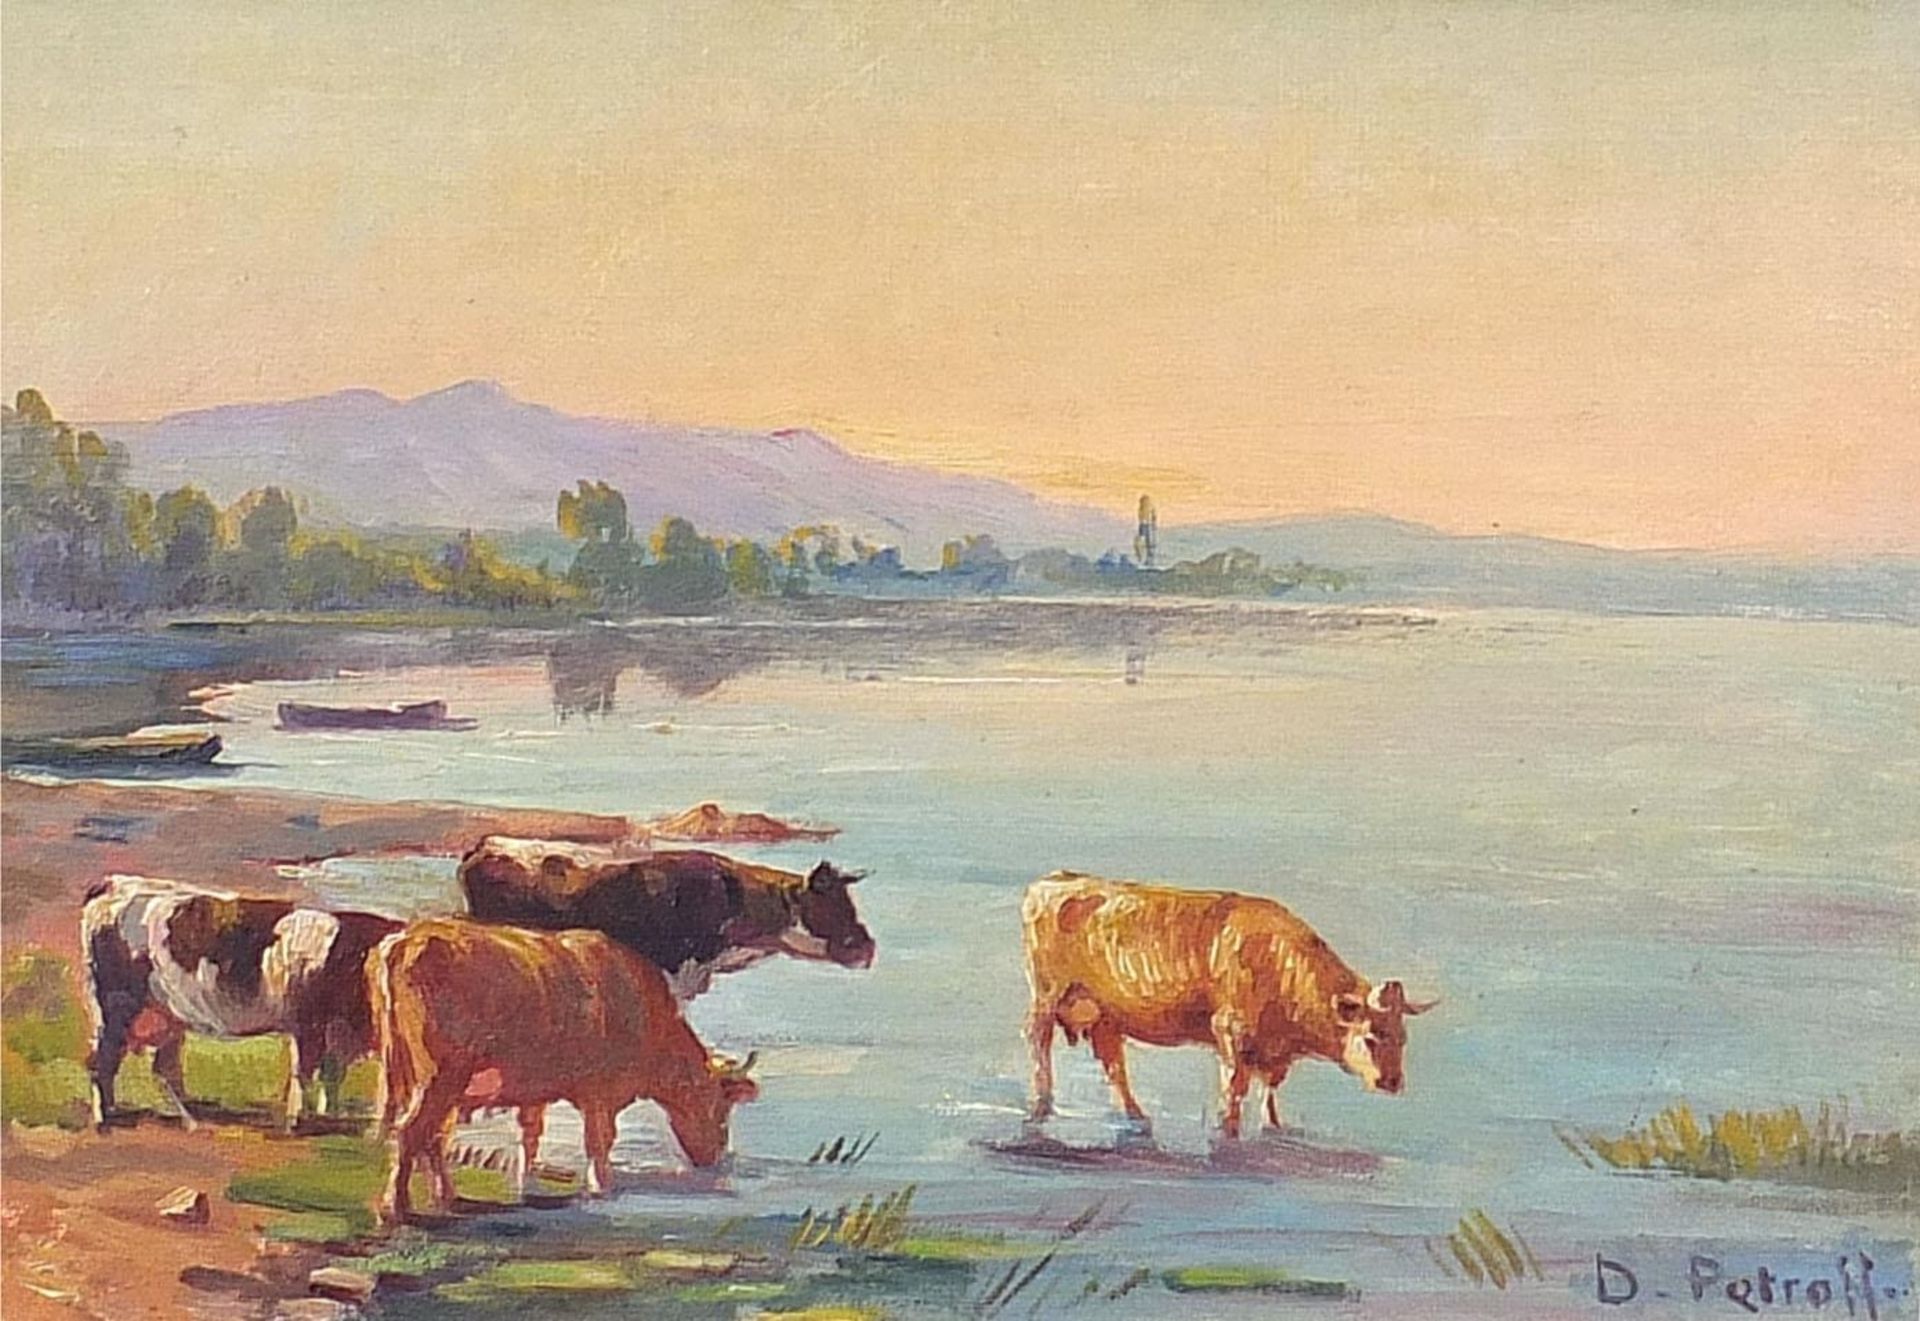 Cows beside water, continental school oil on board, indistinctly signed, possibly D Petrott,